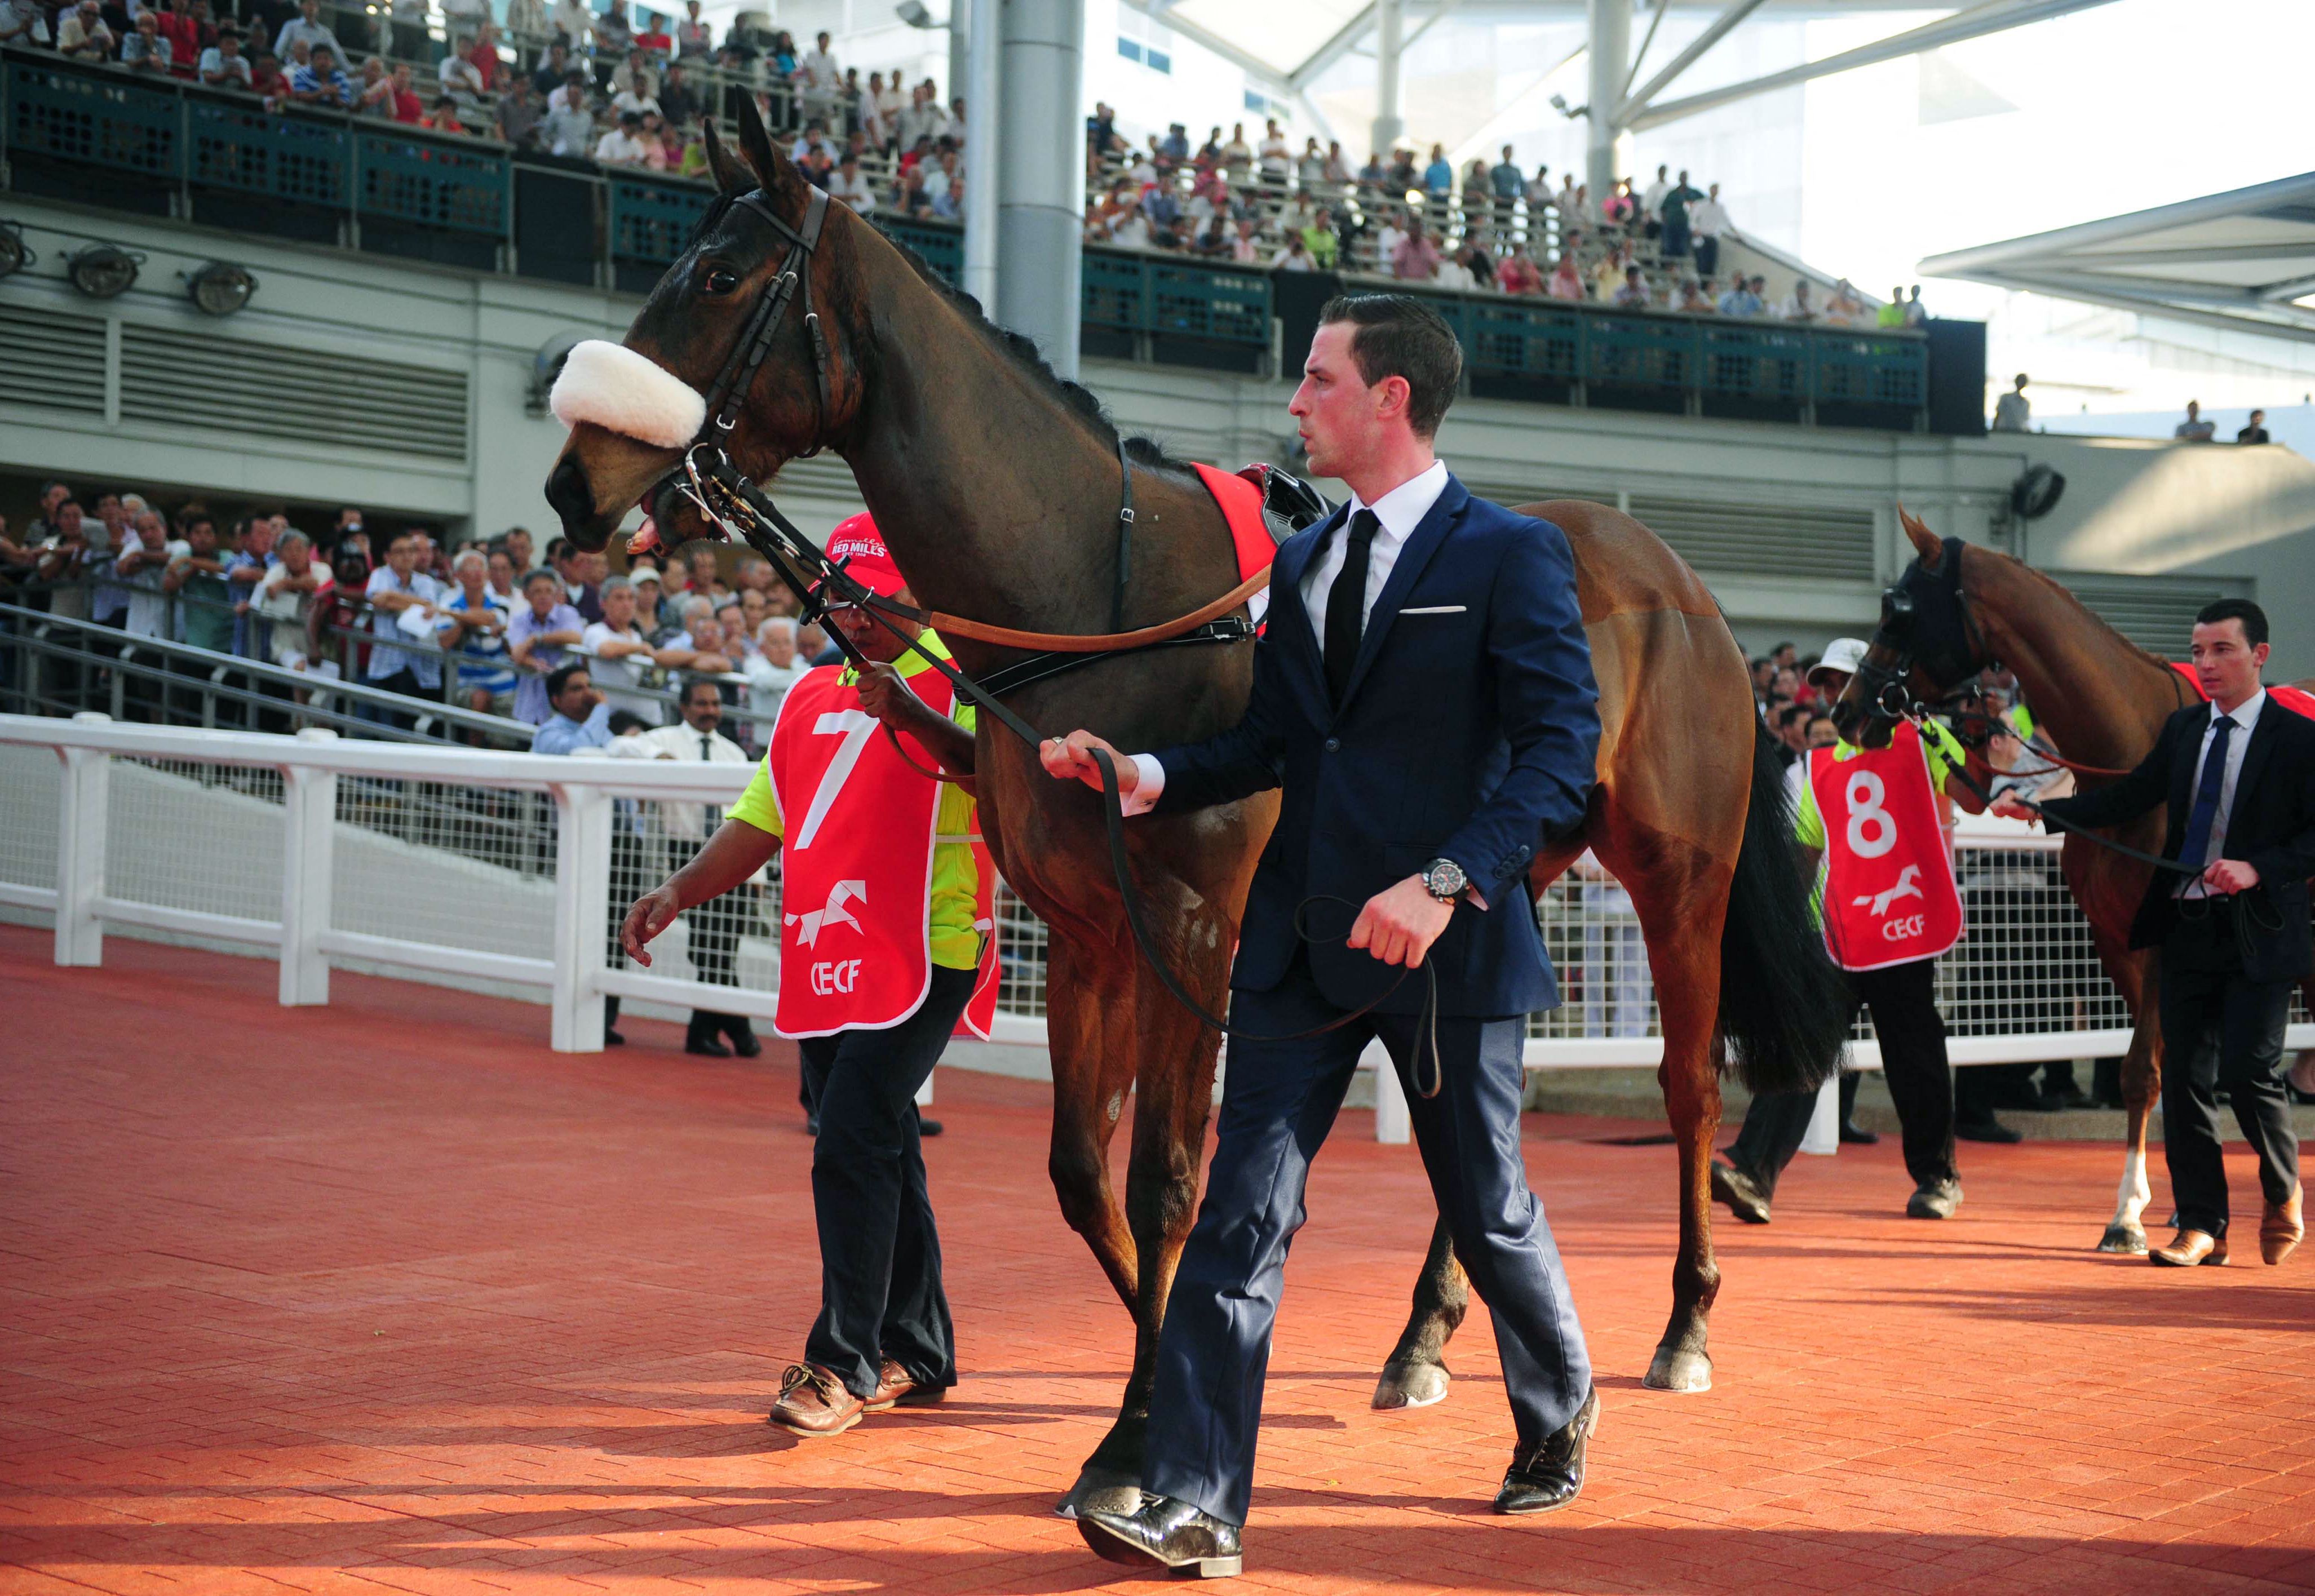 Horses are paraded before the debut of the China Equine Cultural Festival Singapore Cup at Kranji racecourse in Singapore on 22 February 2015